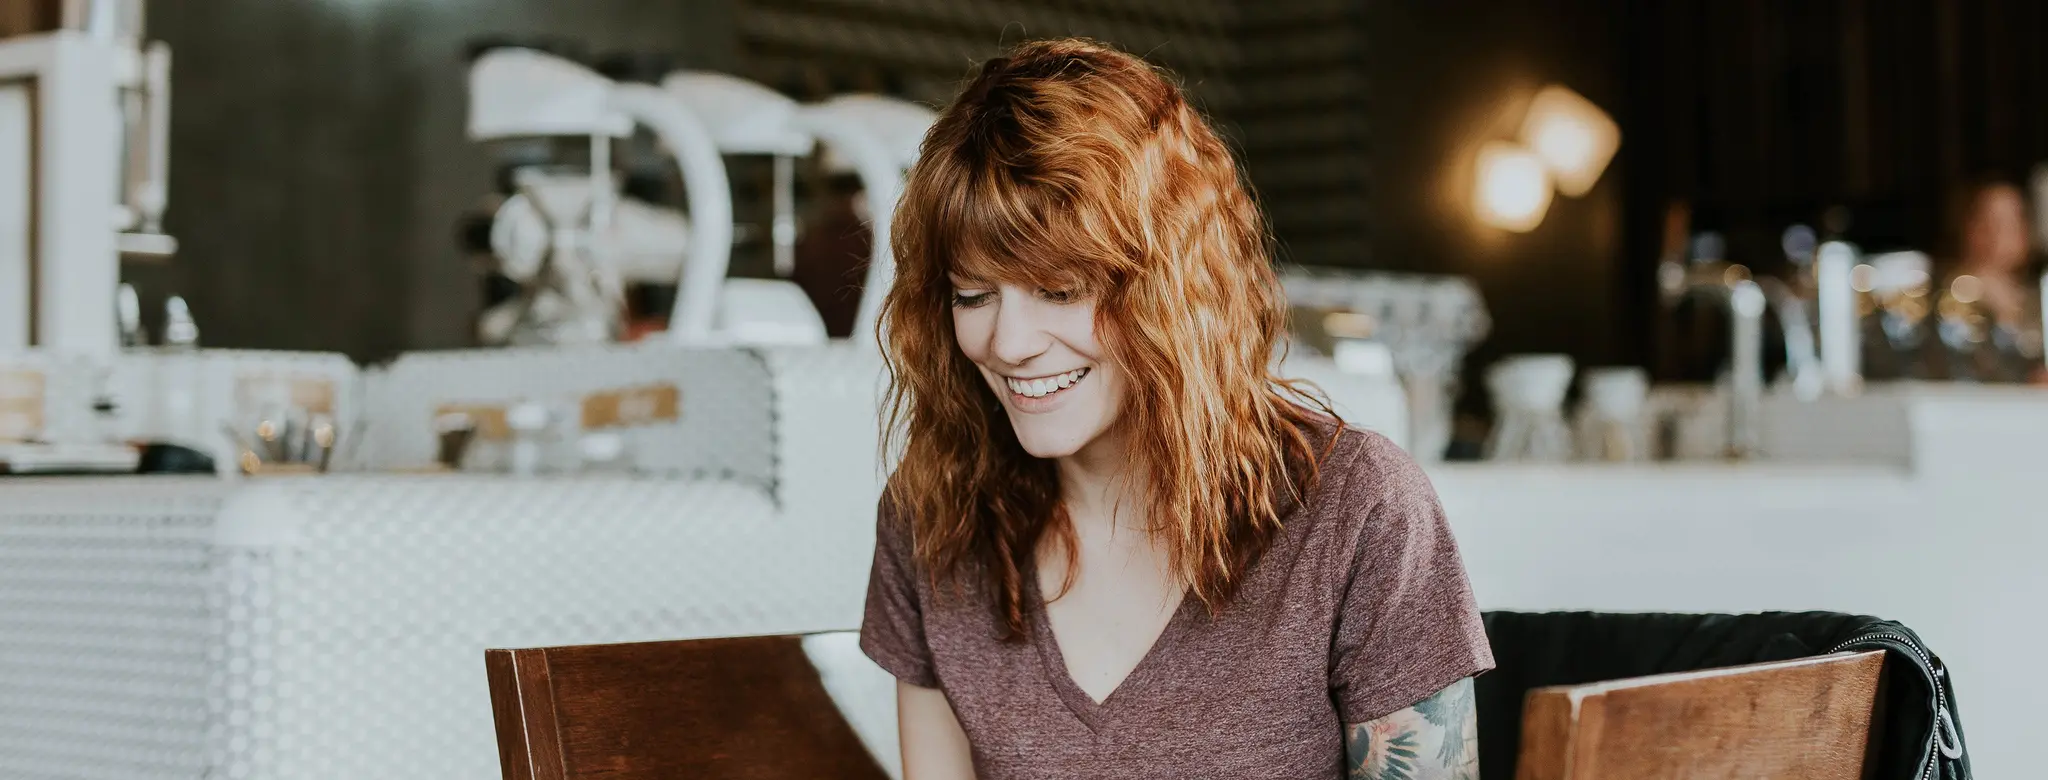 woman with red hair in coffee shop on laptop